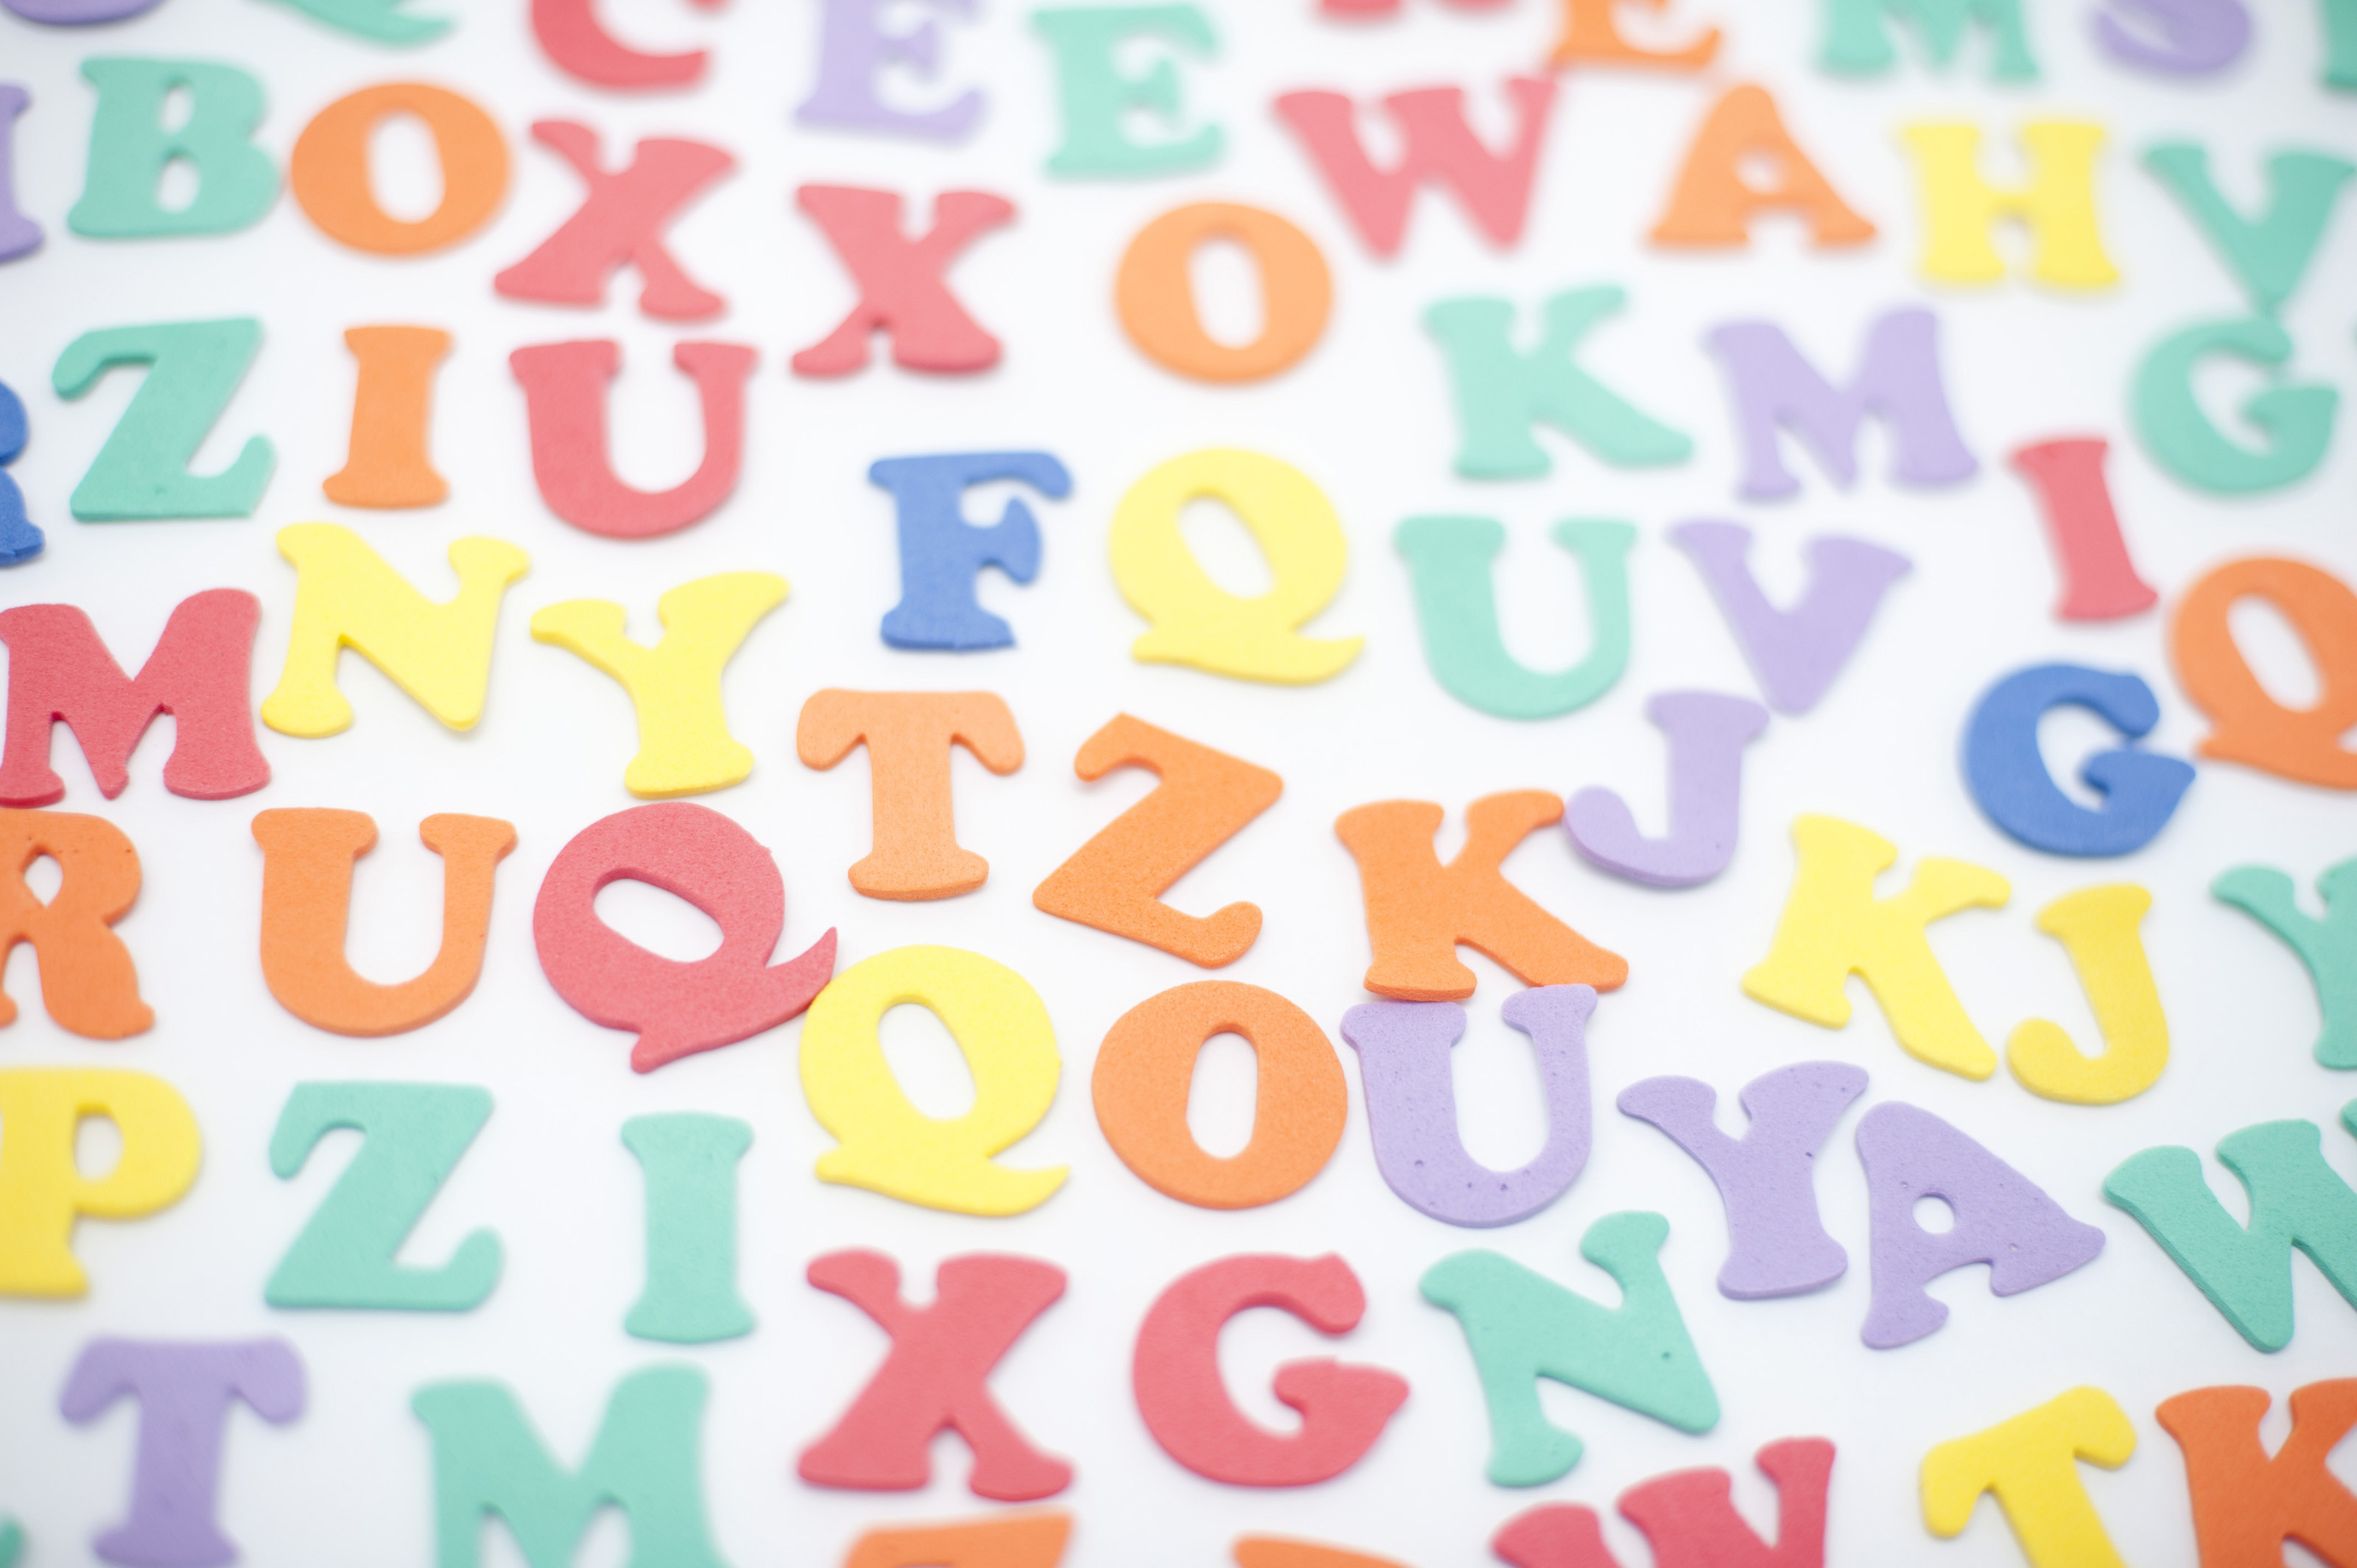 3200x2129 Colourful alphabet background with random scattered uppercase letters on a  white surface